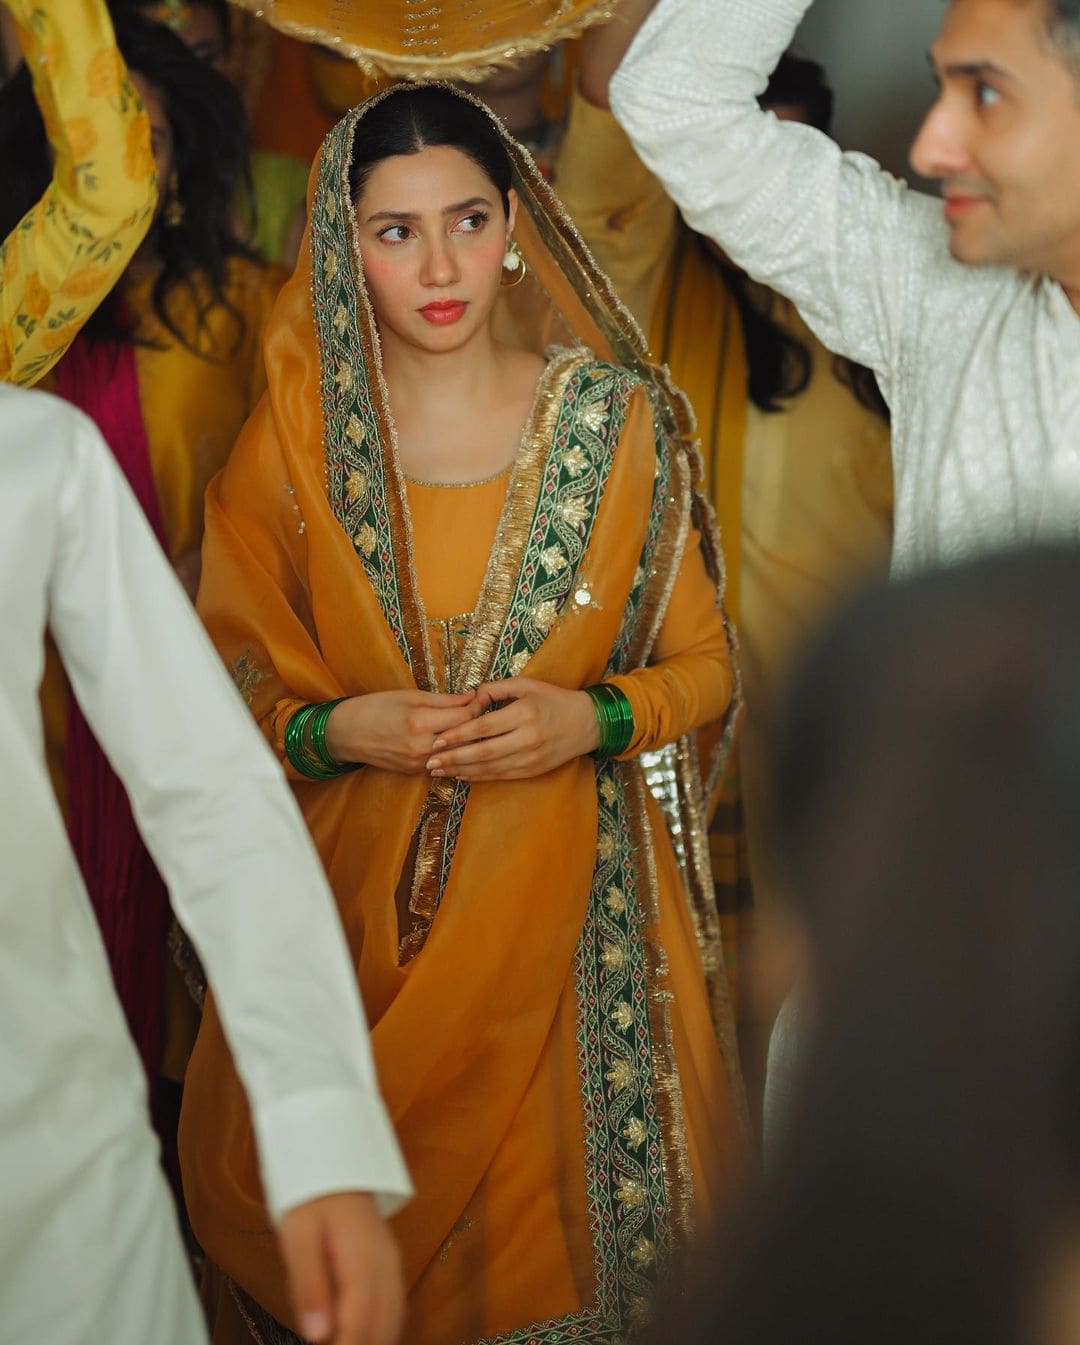 Mahira Khan's Orange & Desi Outfit For Her ‘Mayun’ Ceremony